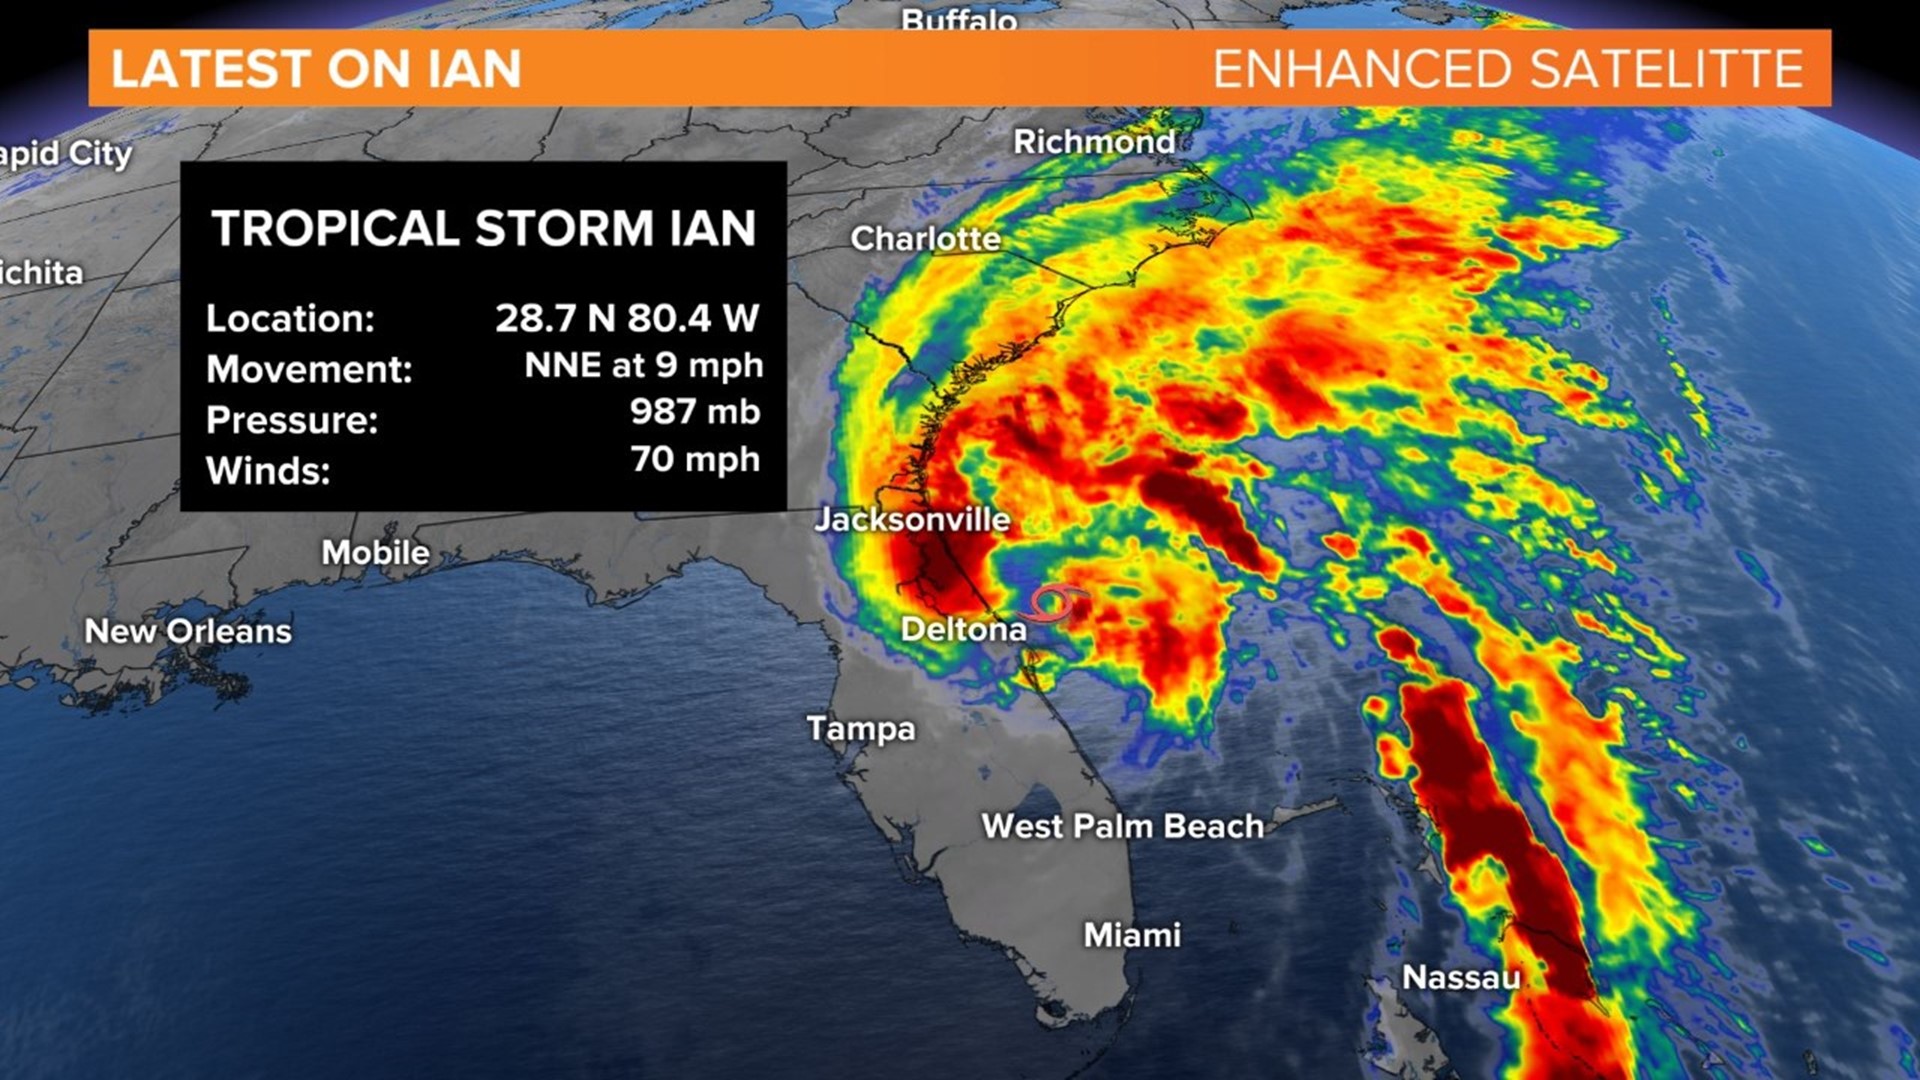 After hitting Florida as a hurricane, Ian was downgraded to a tropical storm Thursday, but is now taking aim at the east coast of South Carolina.